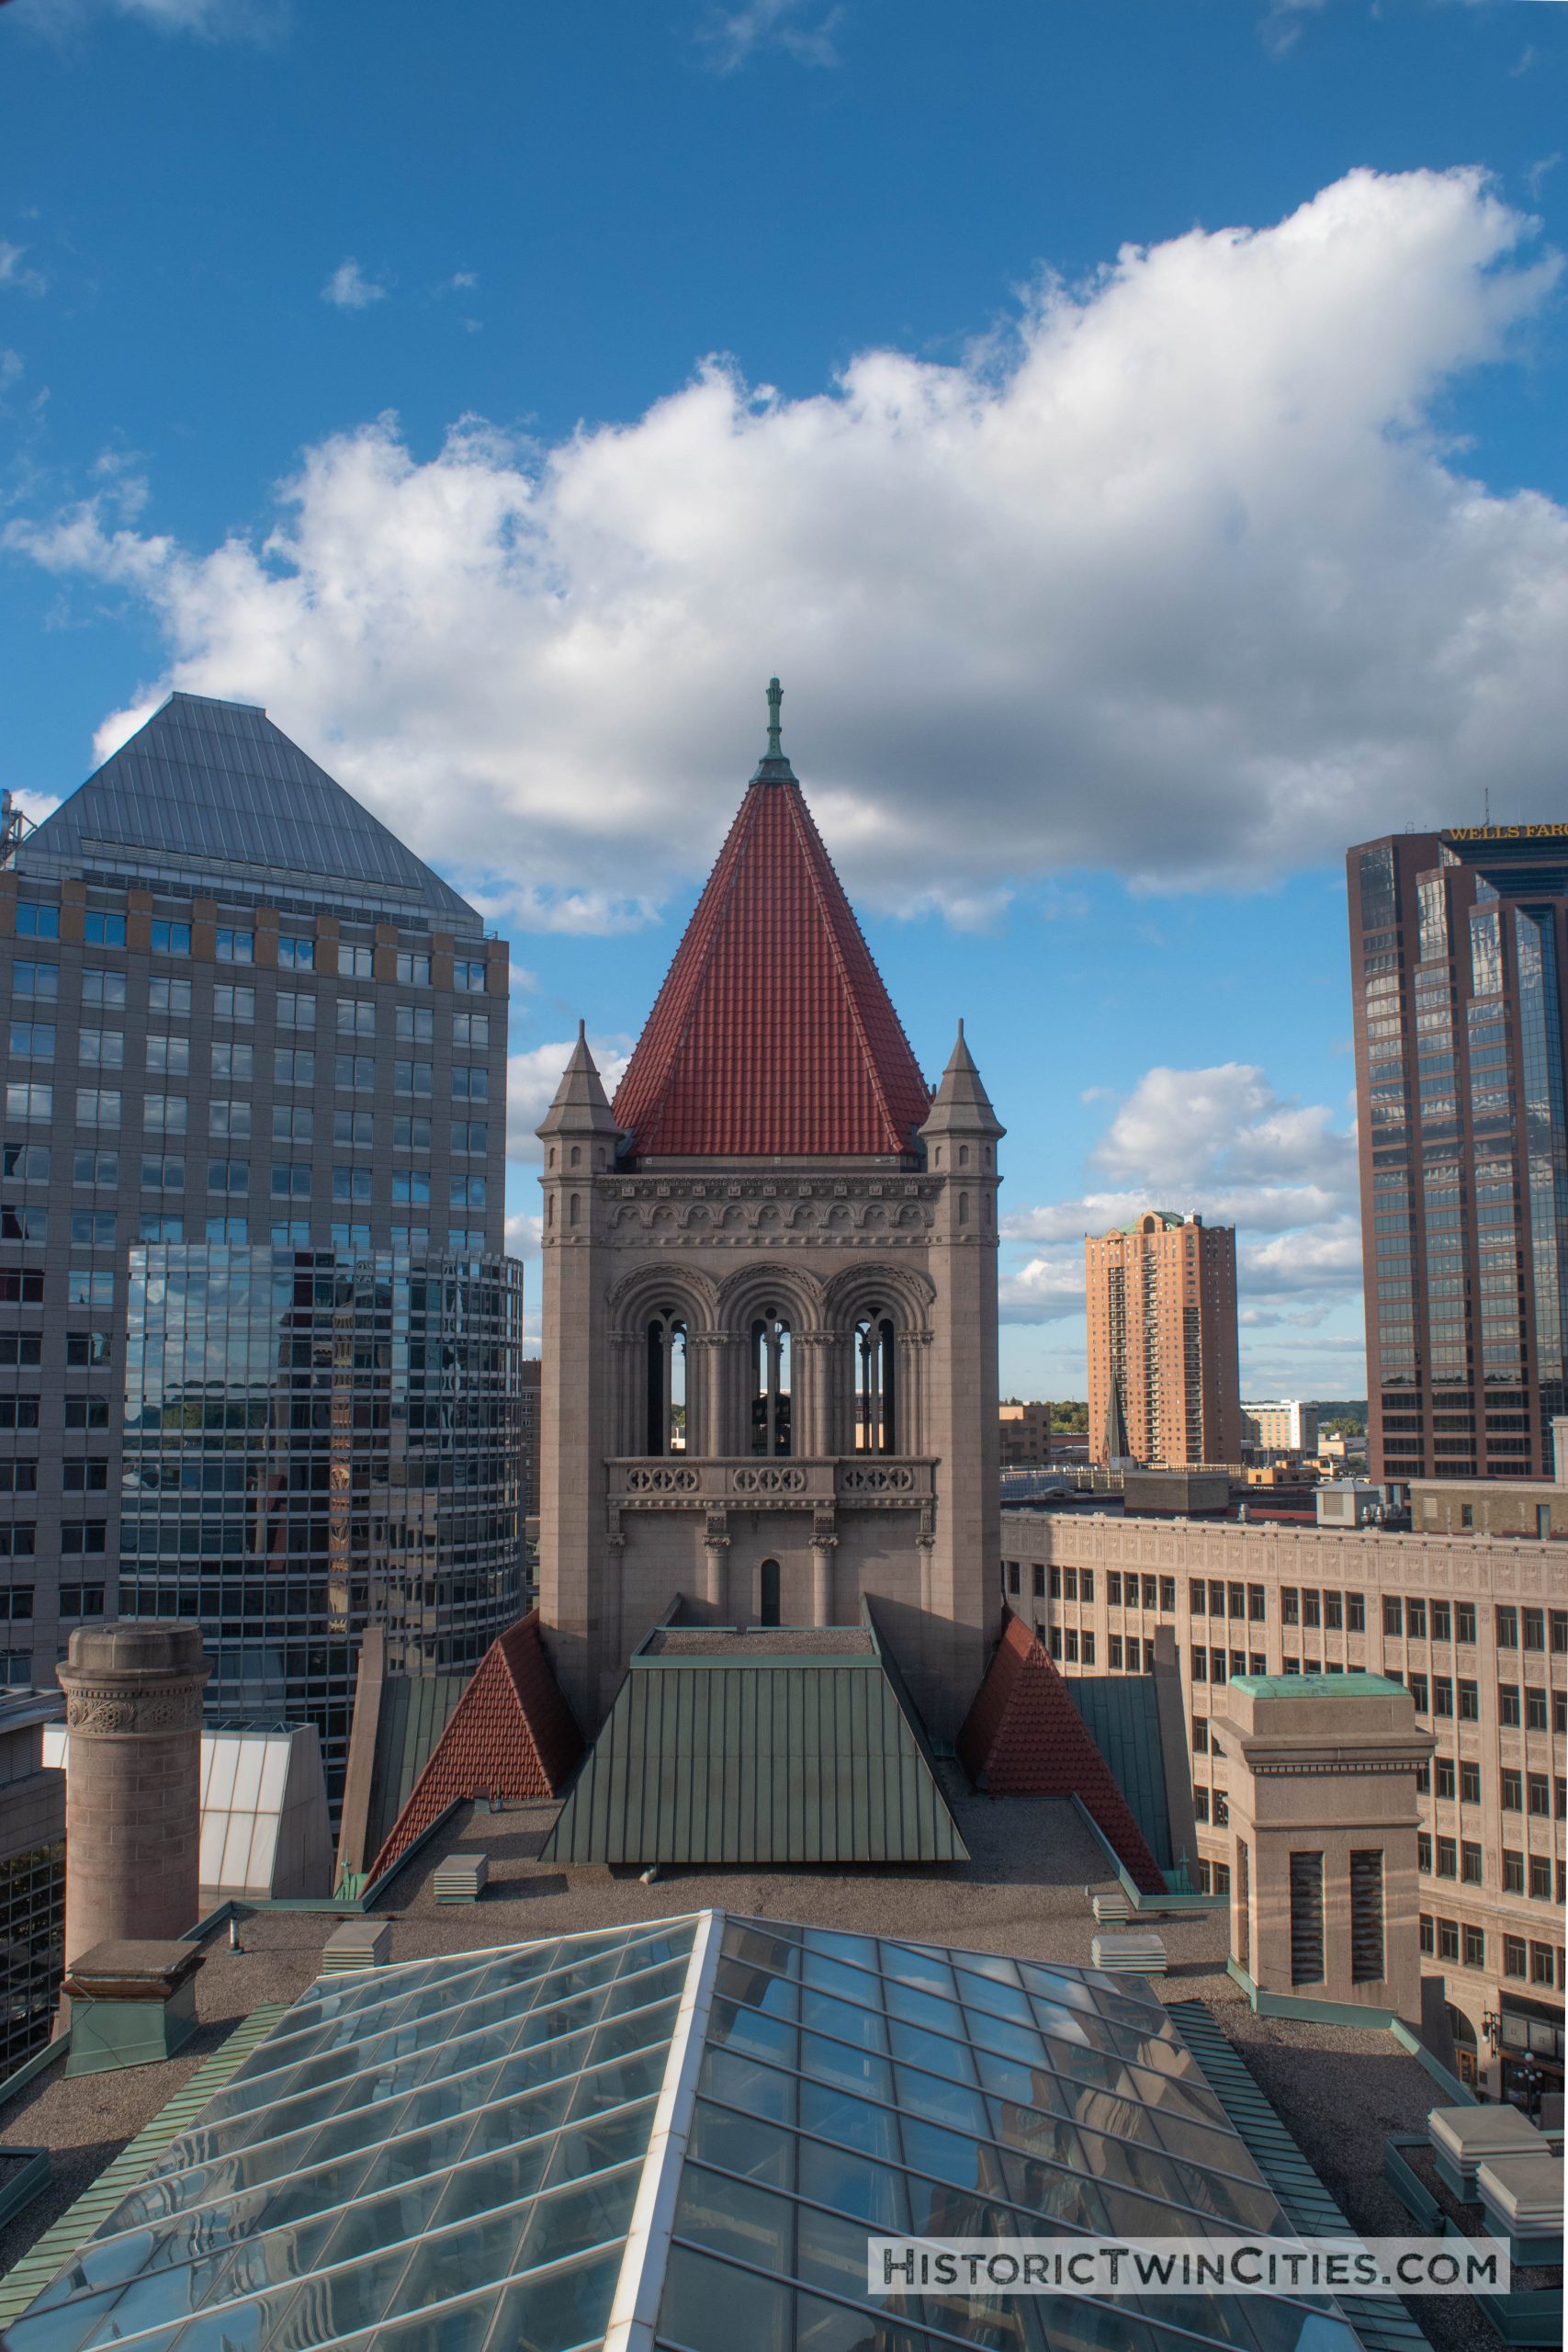 View of the north tower from the clock tower of the Landmark center in St. Paul, MN